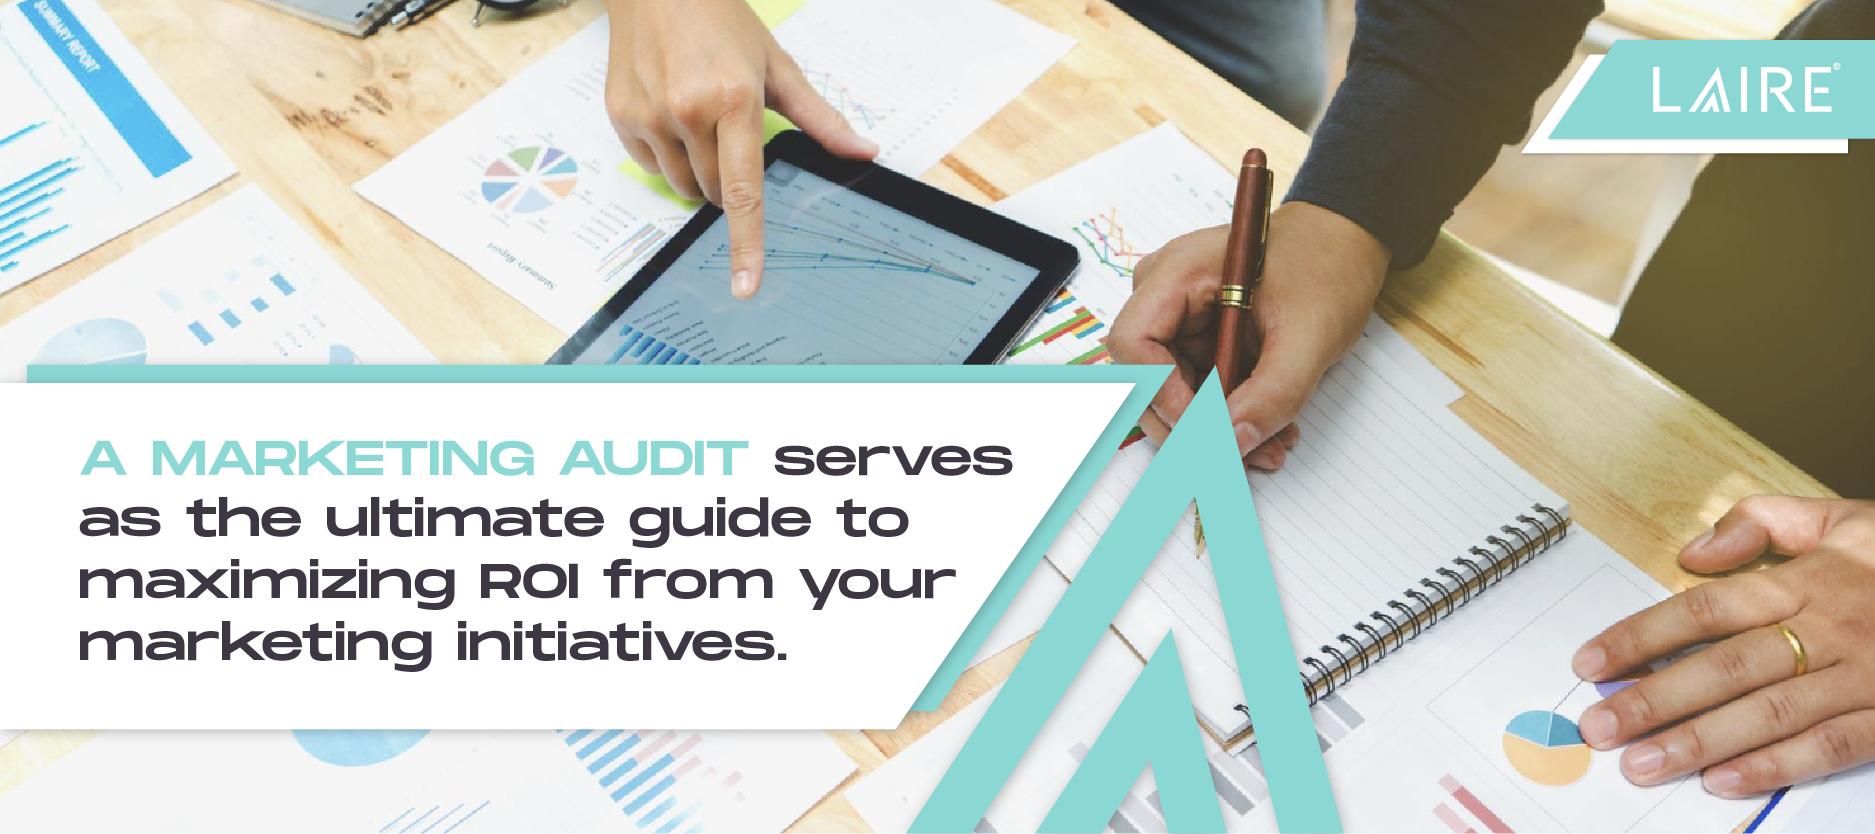 How to Conduct a Marketing Audit_Graphic 1 Freepik